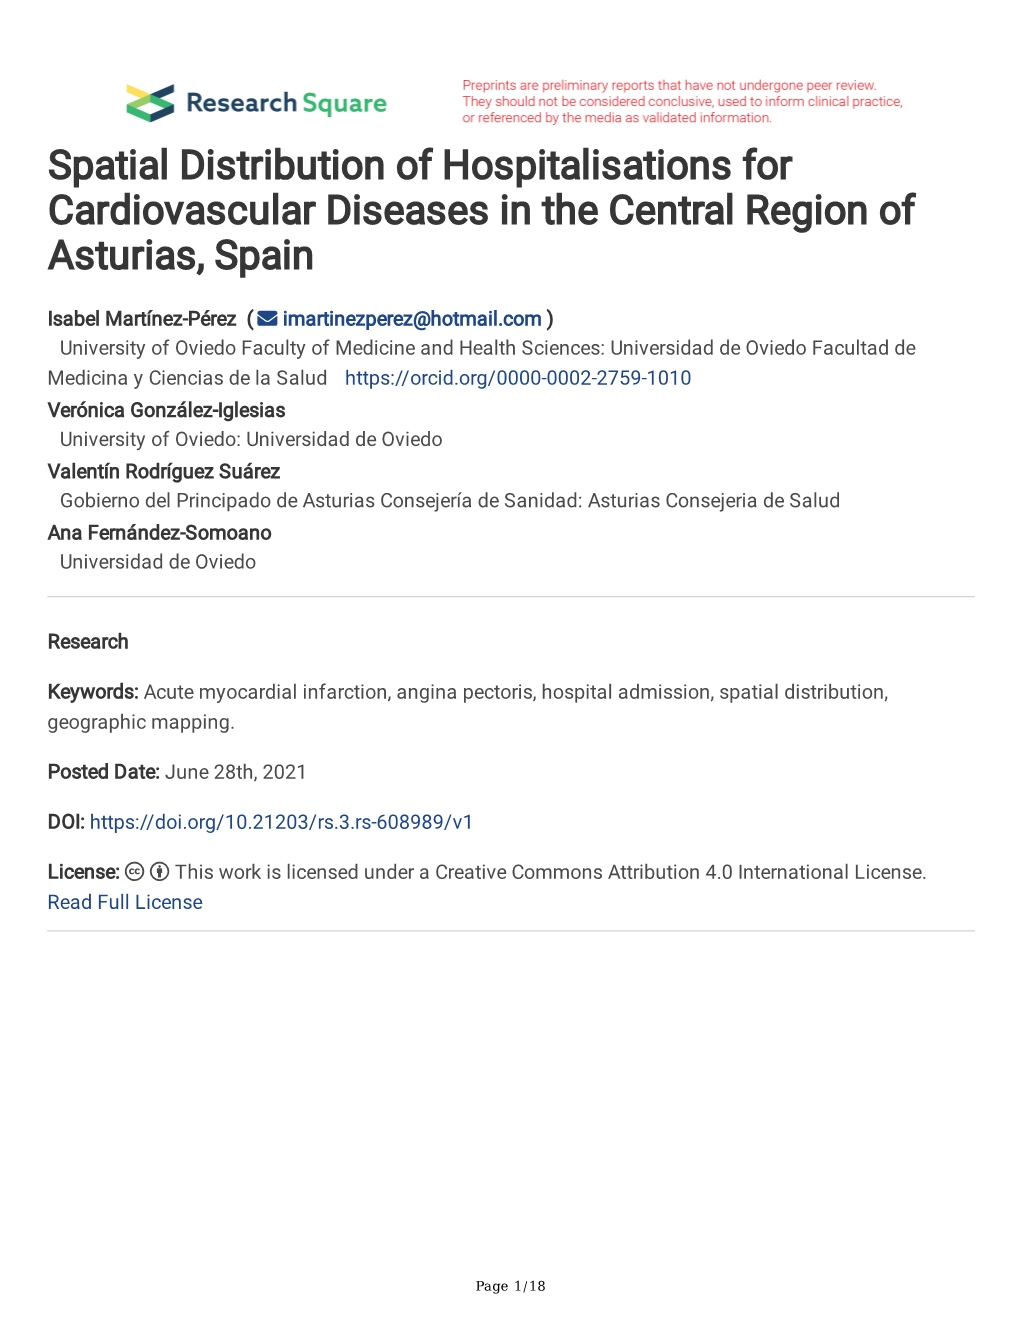 Spatial Distribution of Hospitalisations for Cardiovascular Diseases in the Central Region of ​ Asturias, Spain